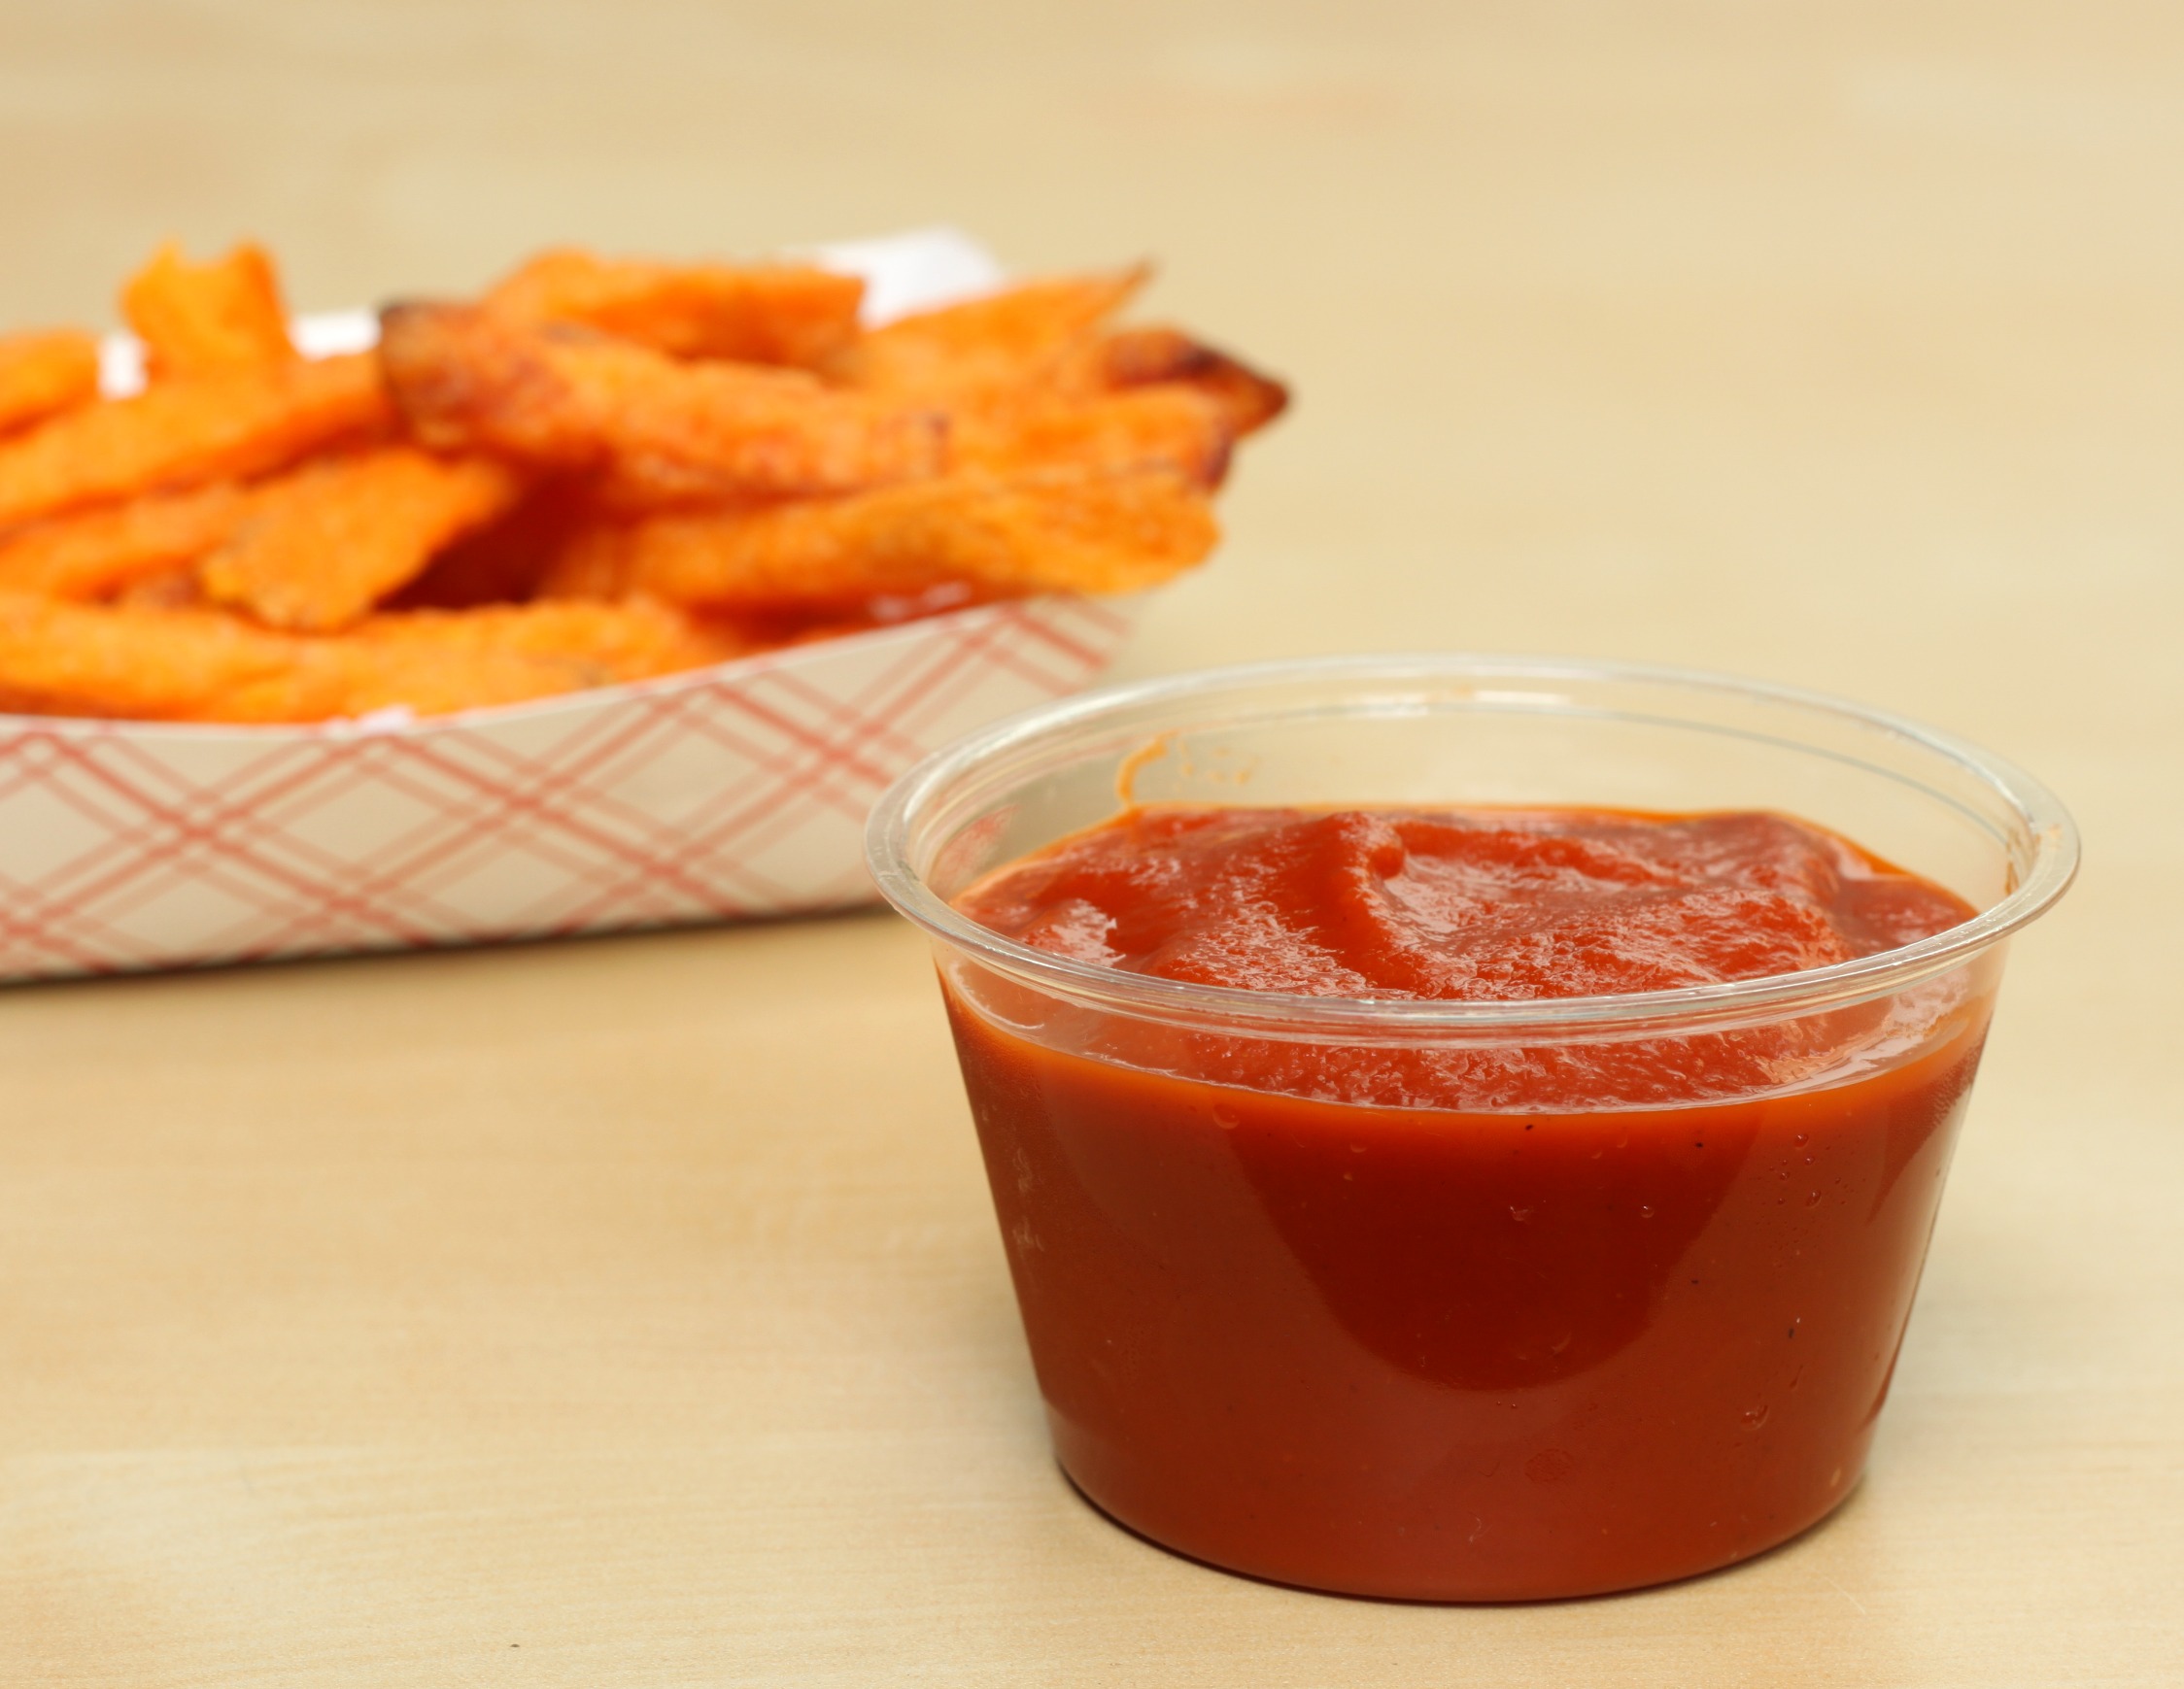 Homemade ketchup with sweet potato fries 1 | 52 Kitchen Adventures